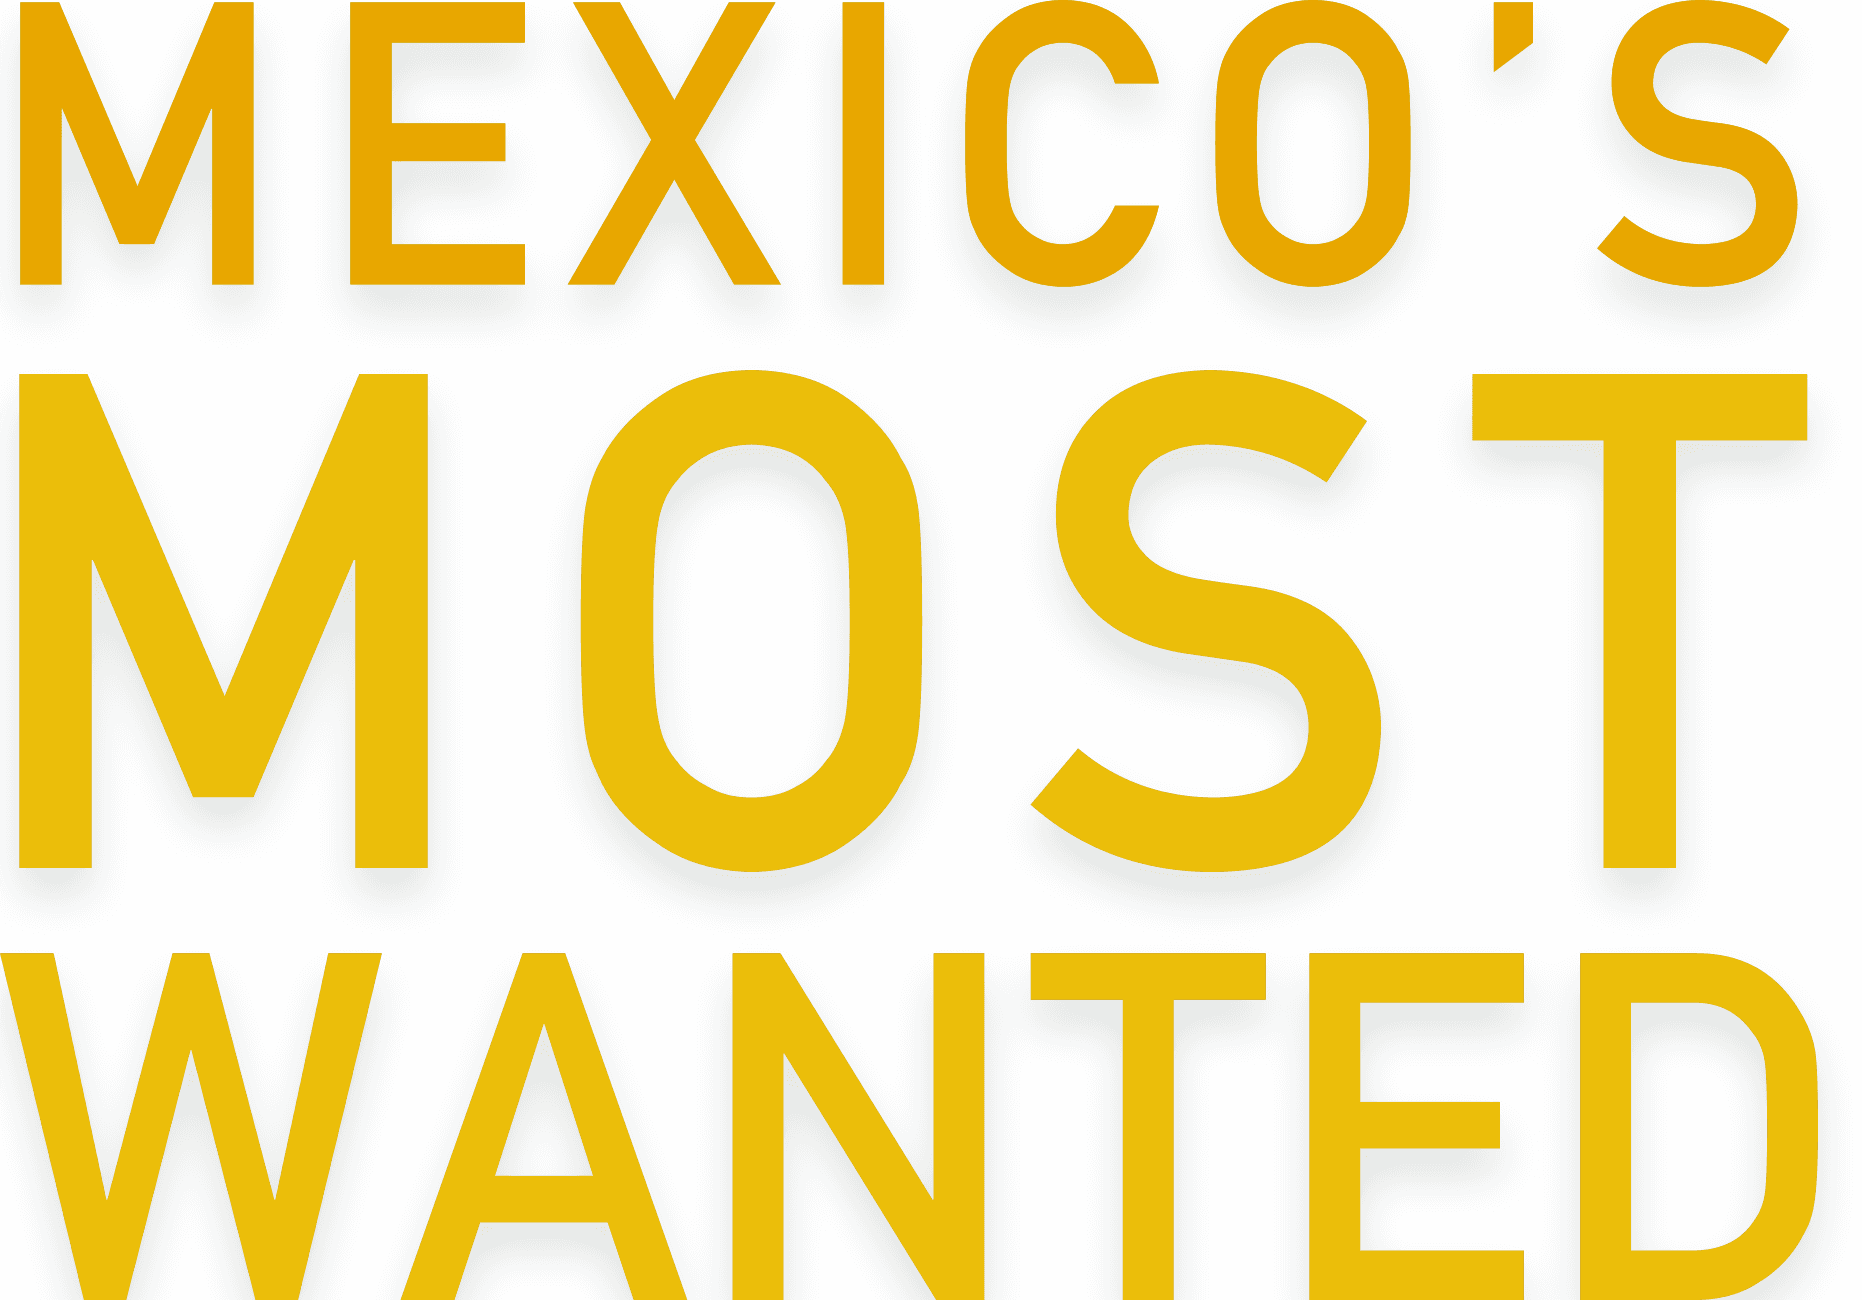 Mexican Gangster logo